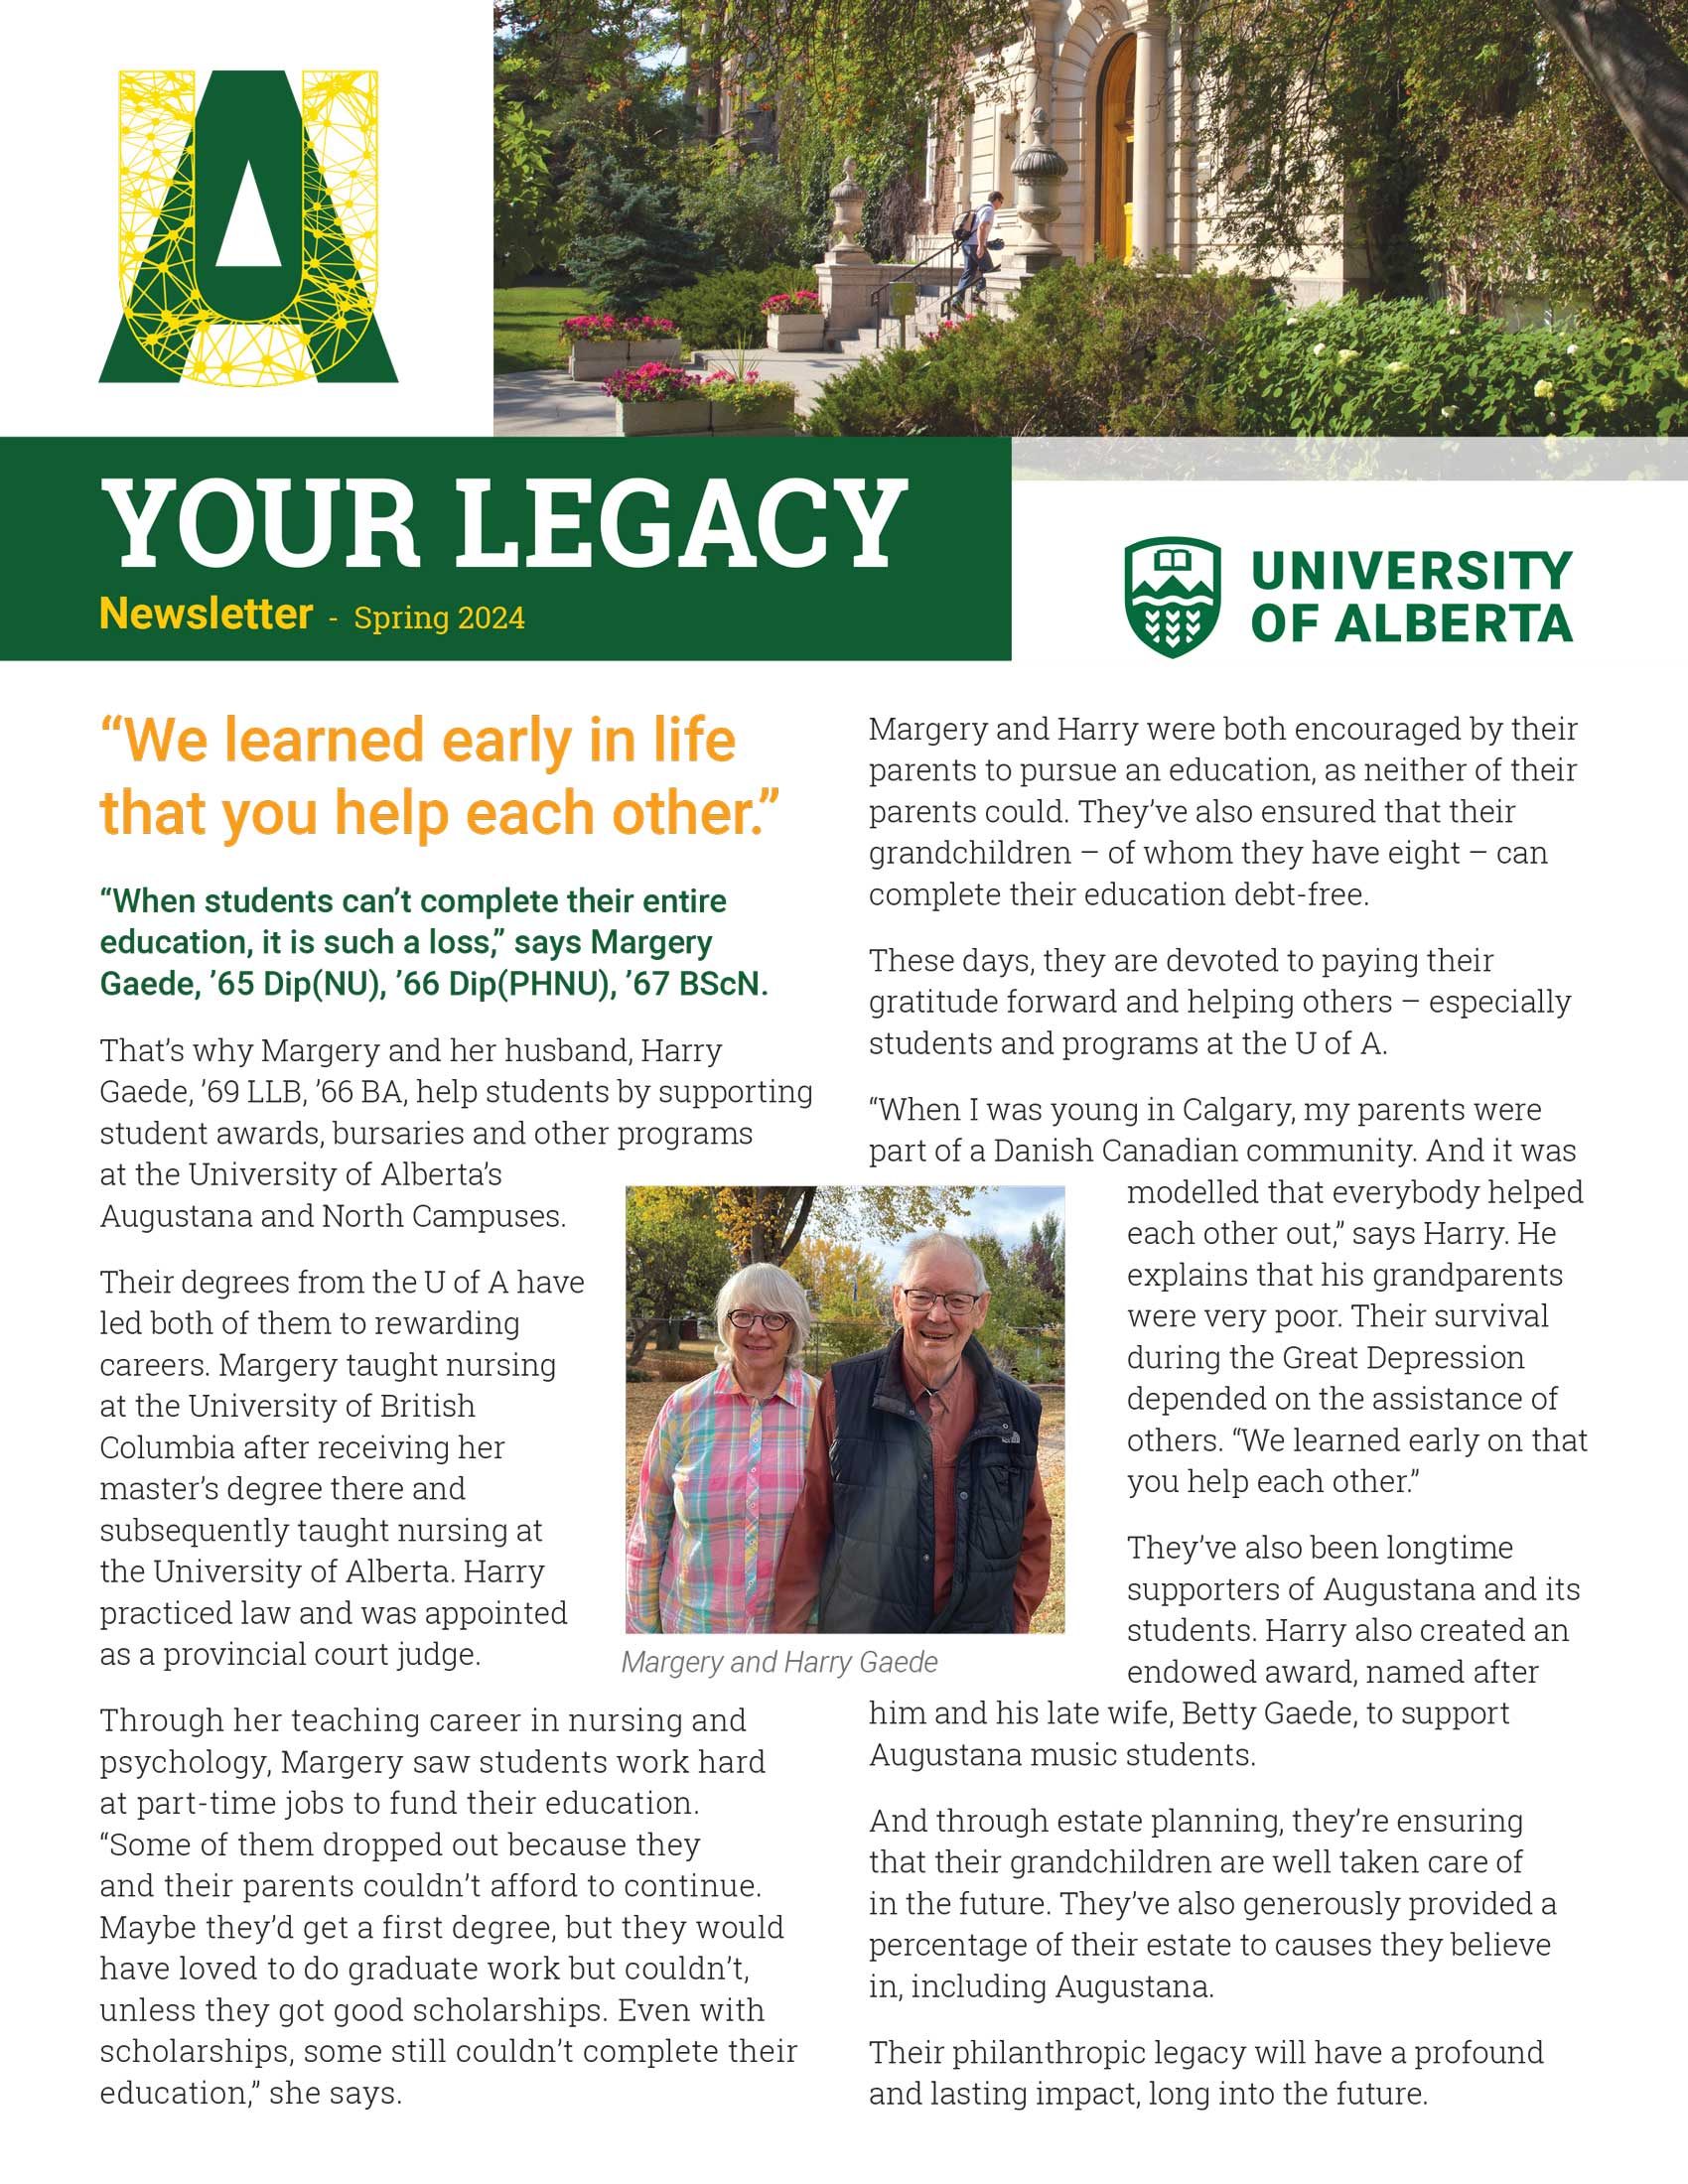 Spring 2024 Your Legacy newsletter